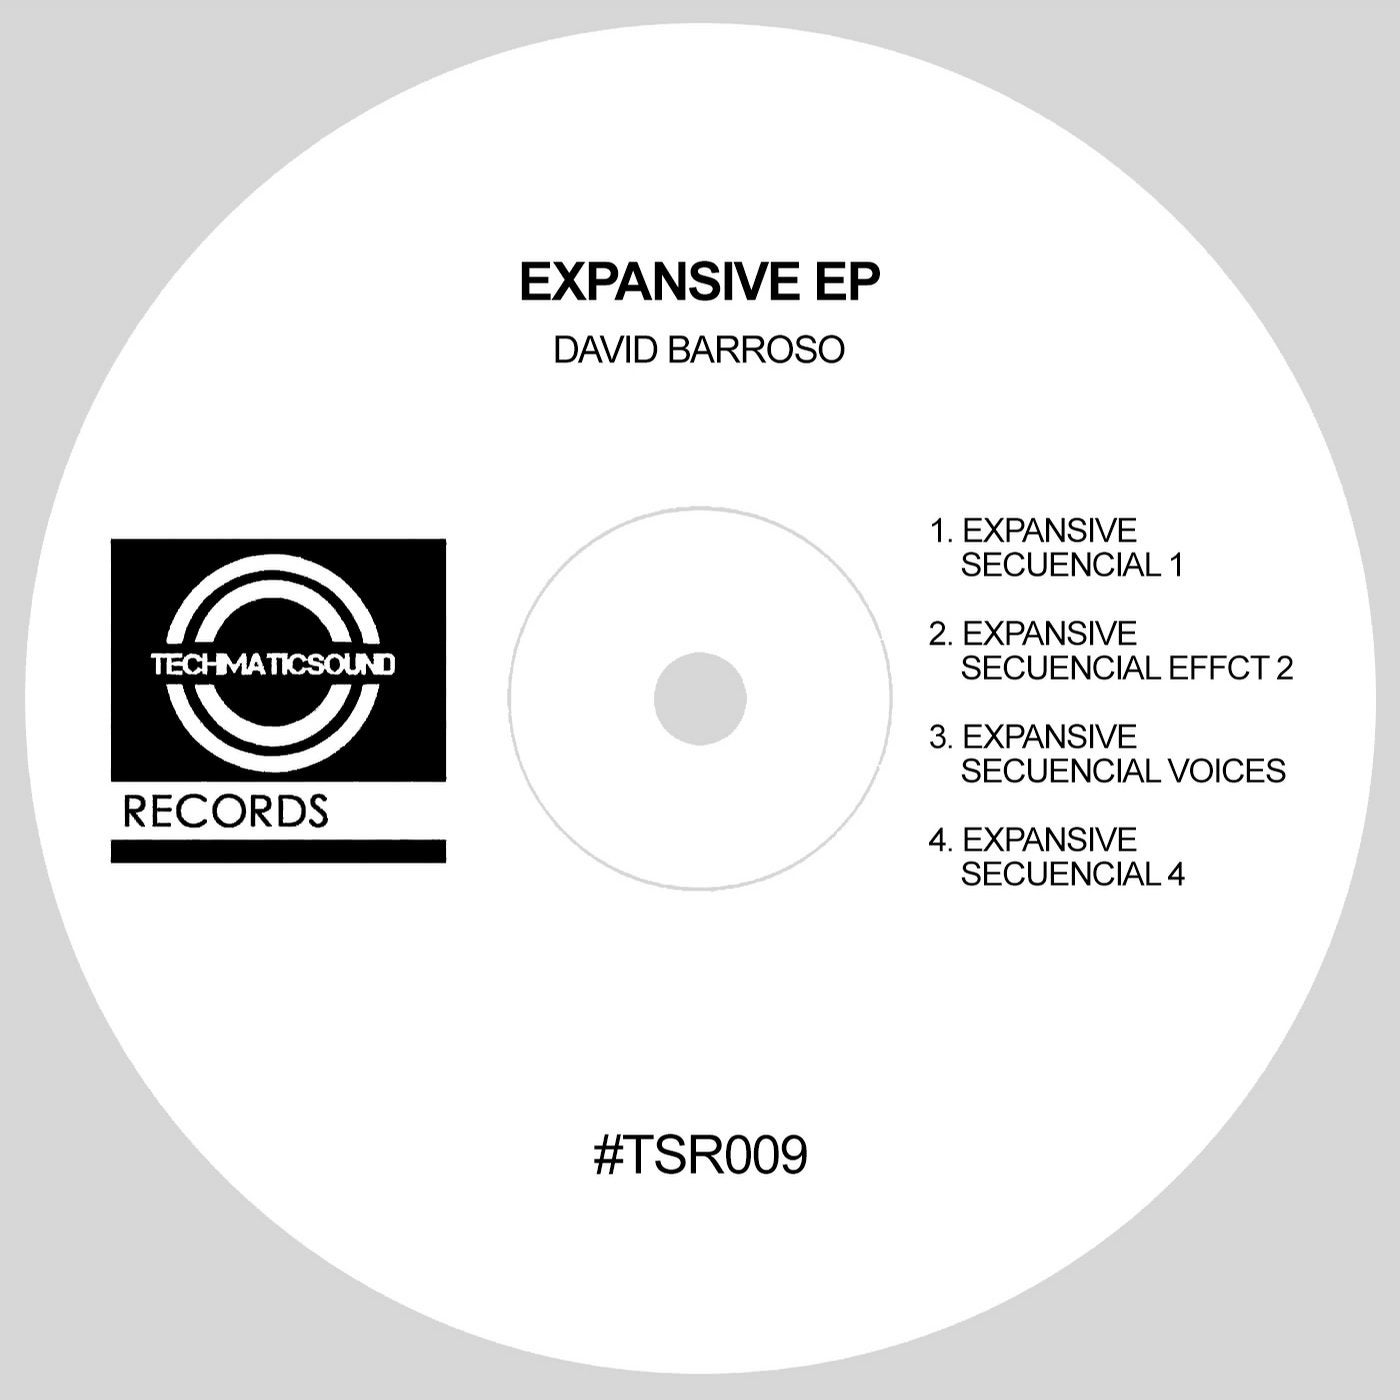 Expansive EP